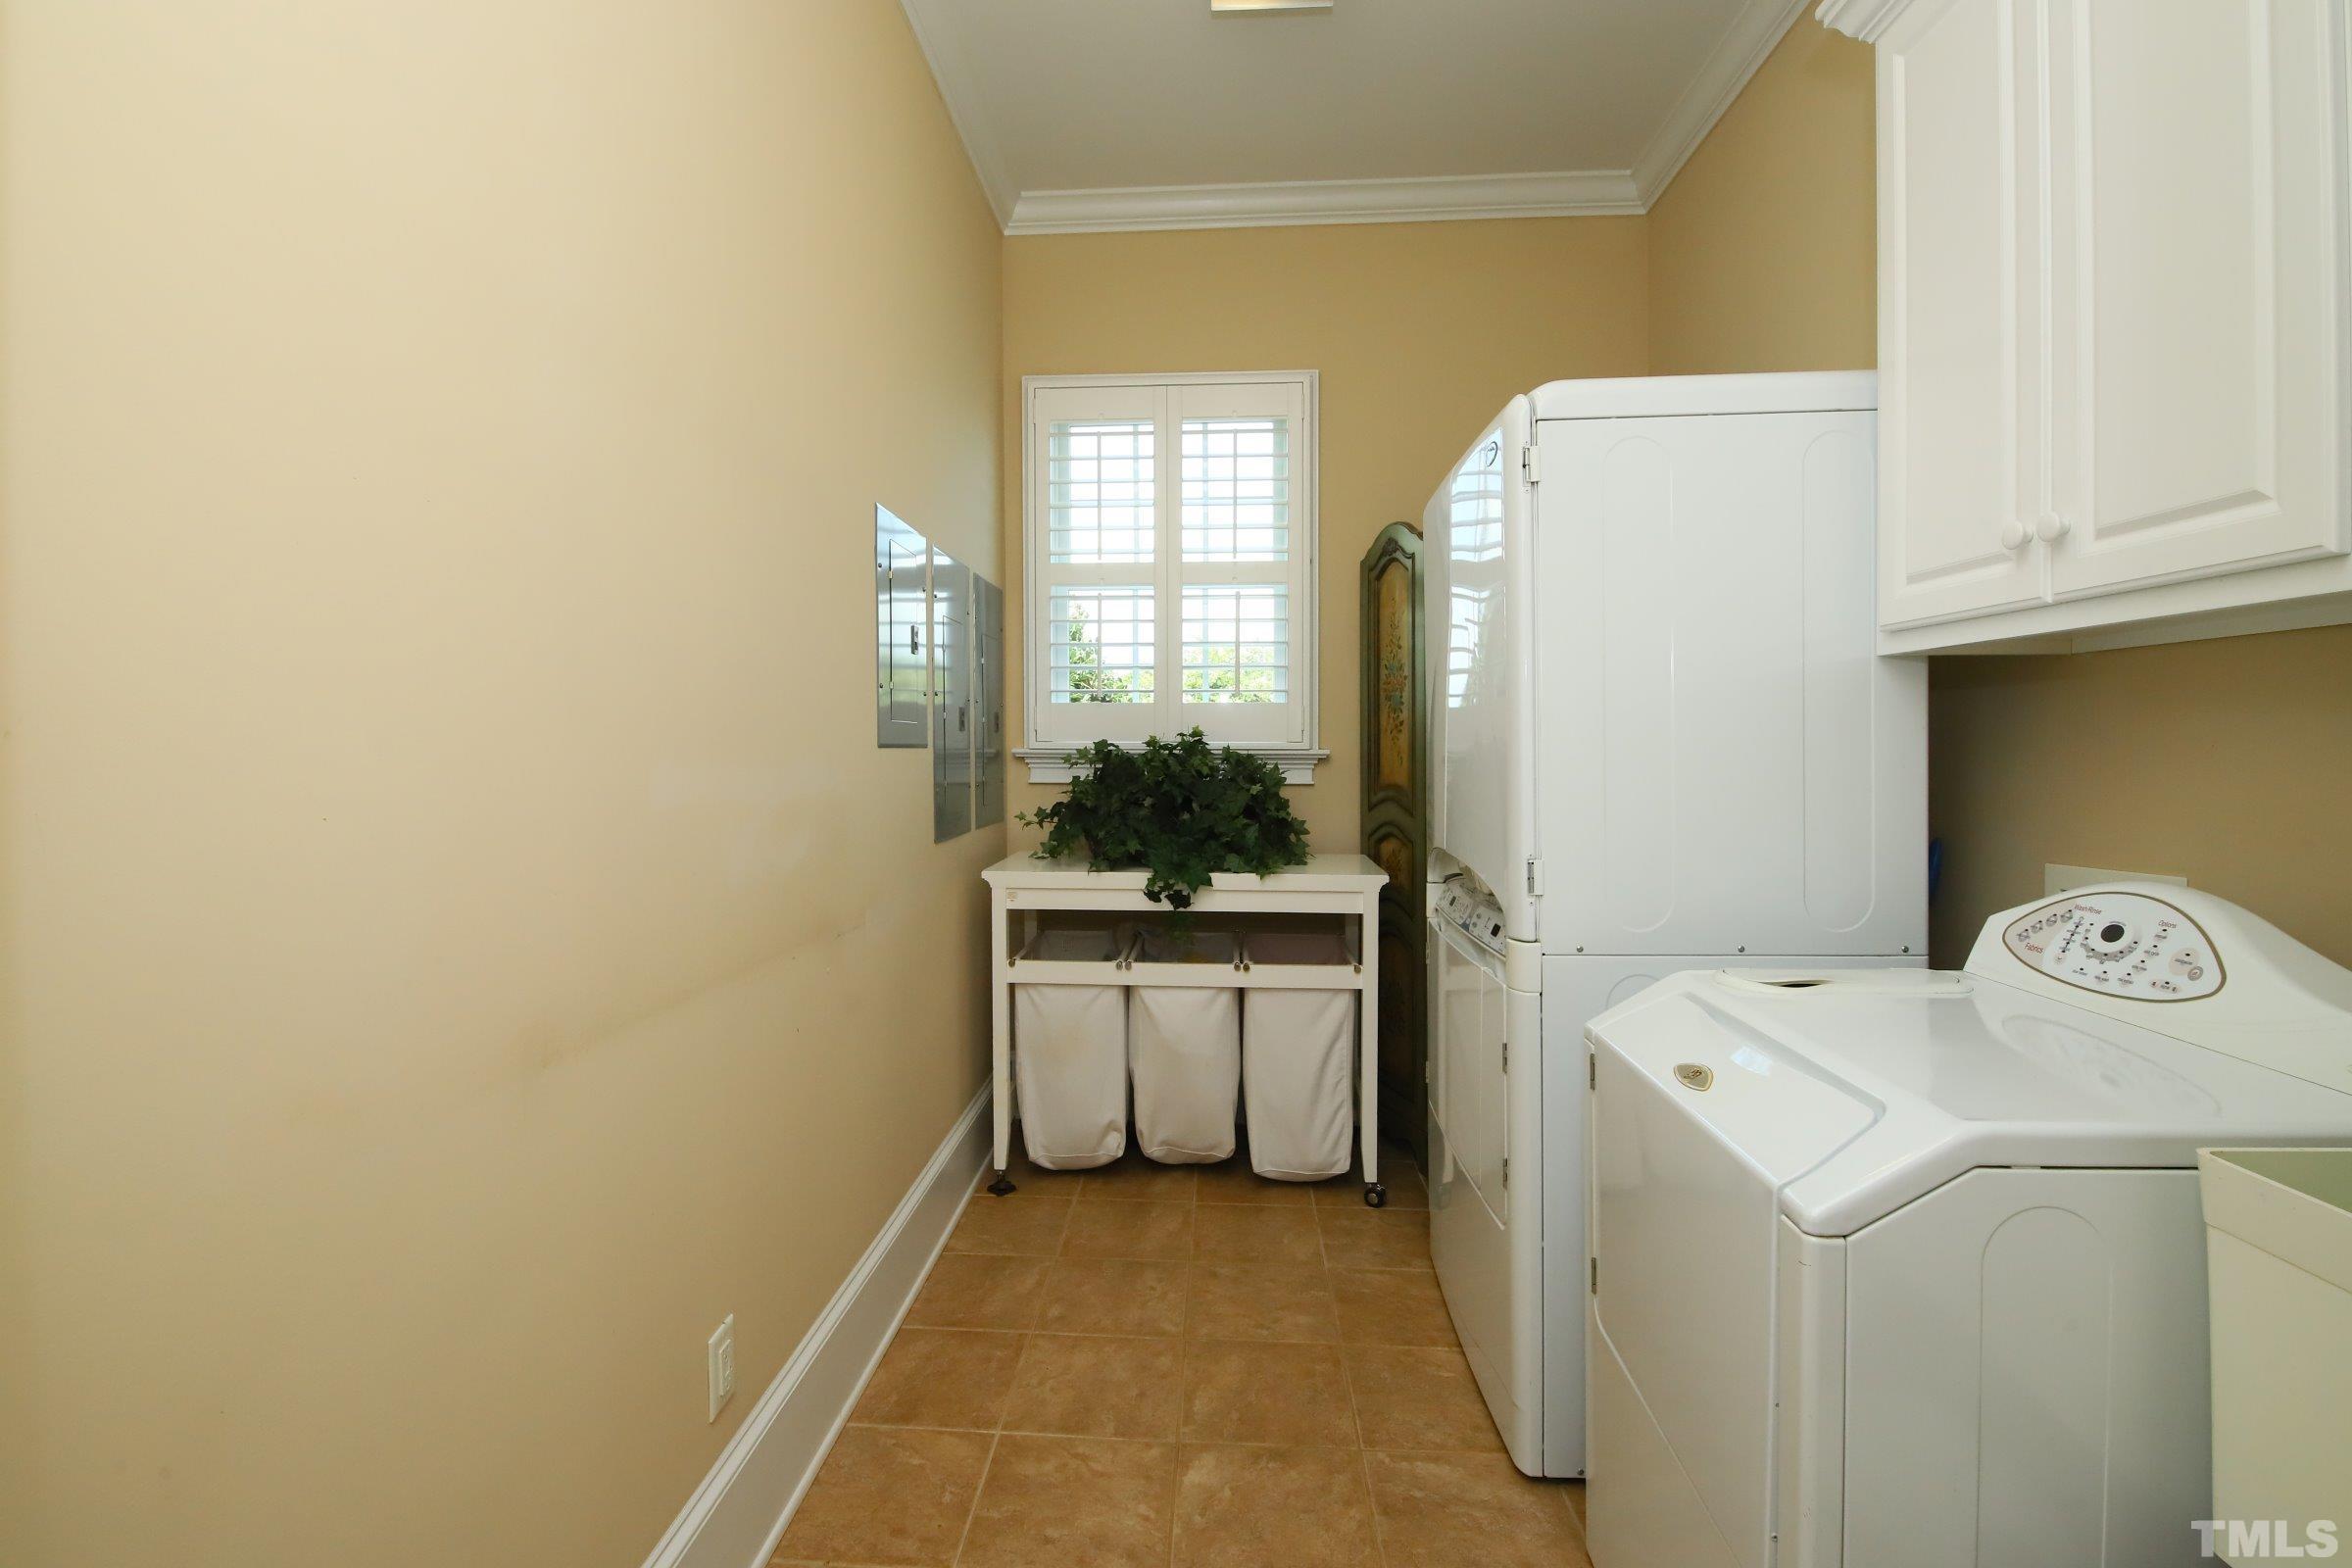 Extremely spacious making laundry time a breeze. Features storage and laundry sink.